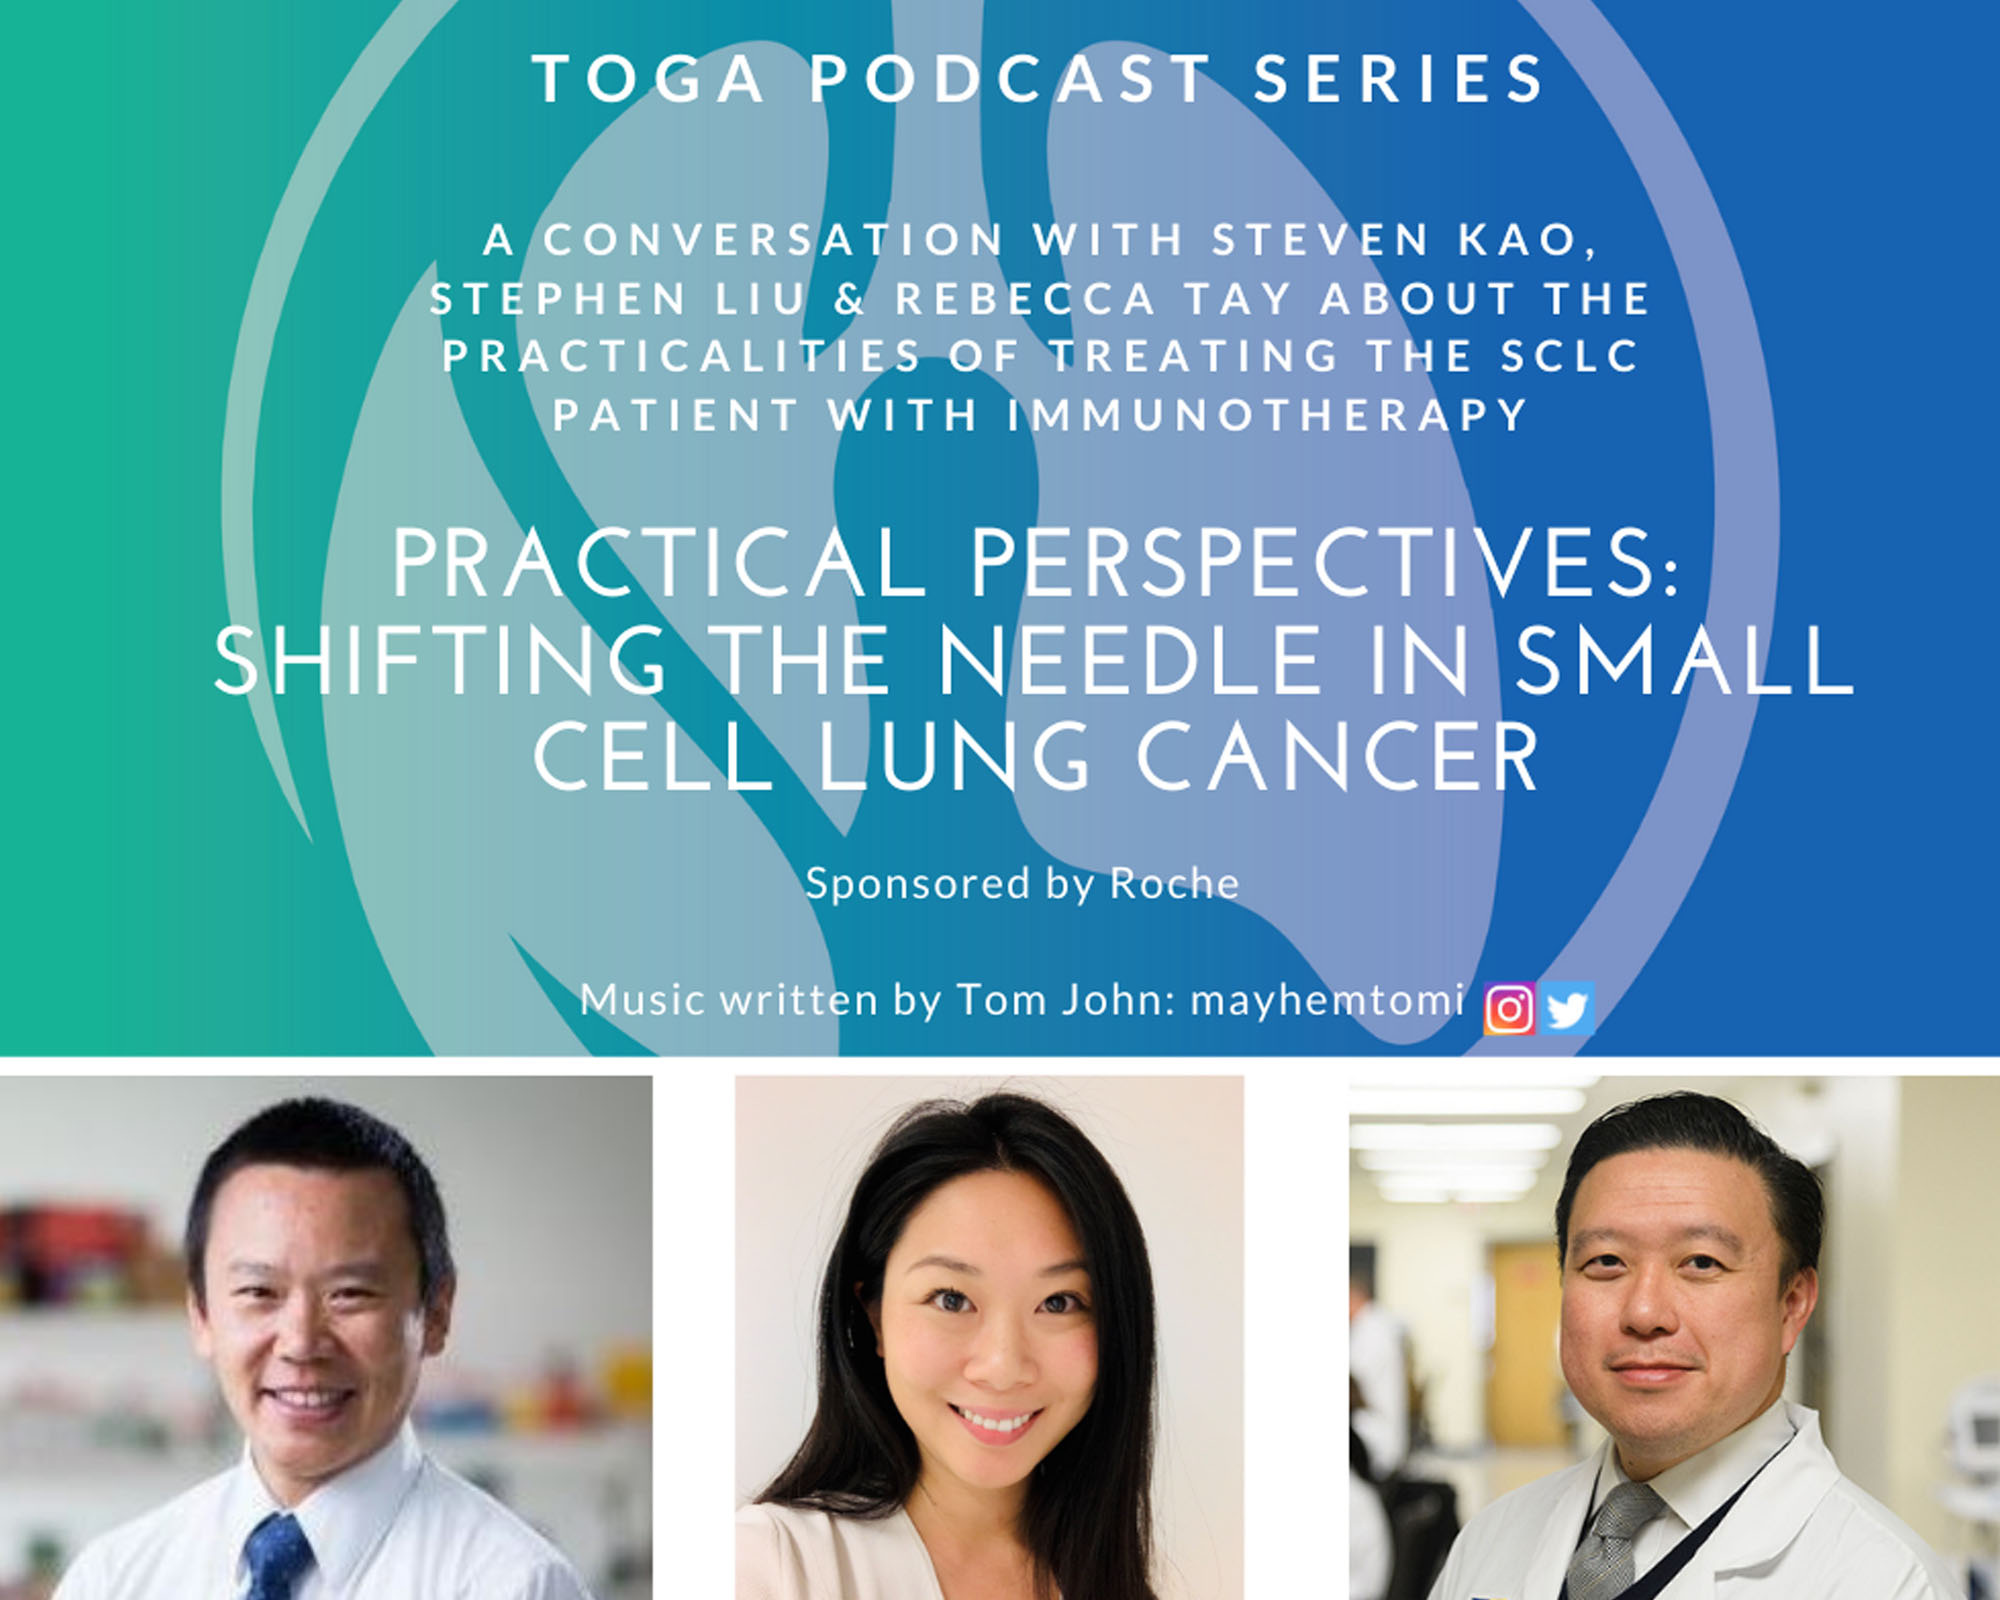 TOGA podcast logo and headshot photos of an Asian clean shaven male with short black hair wearing a shirt and tie, an Asian female doctor with long black straight hair and another Asian male wearing a lab coat with a stethoscope around his neck.